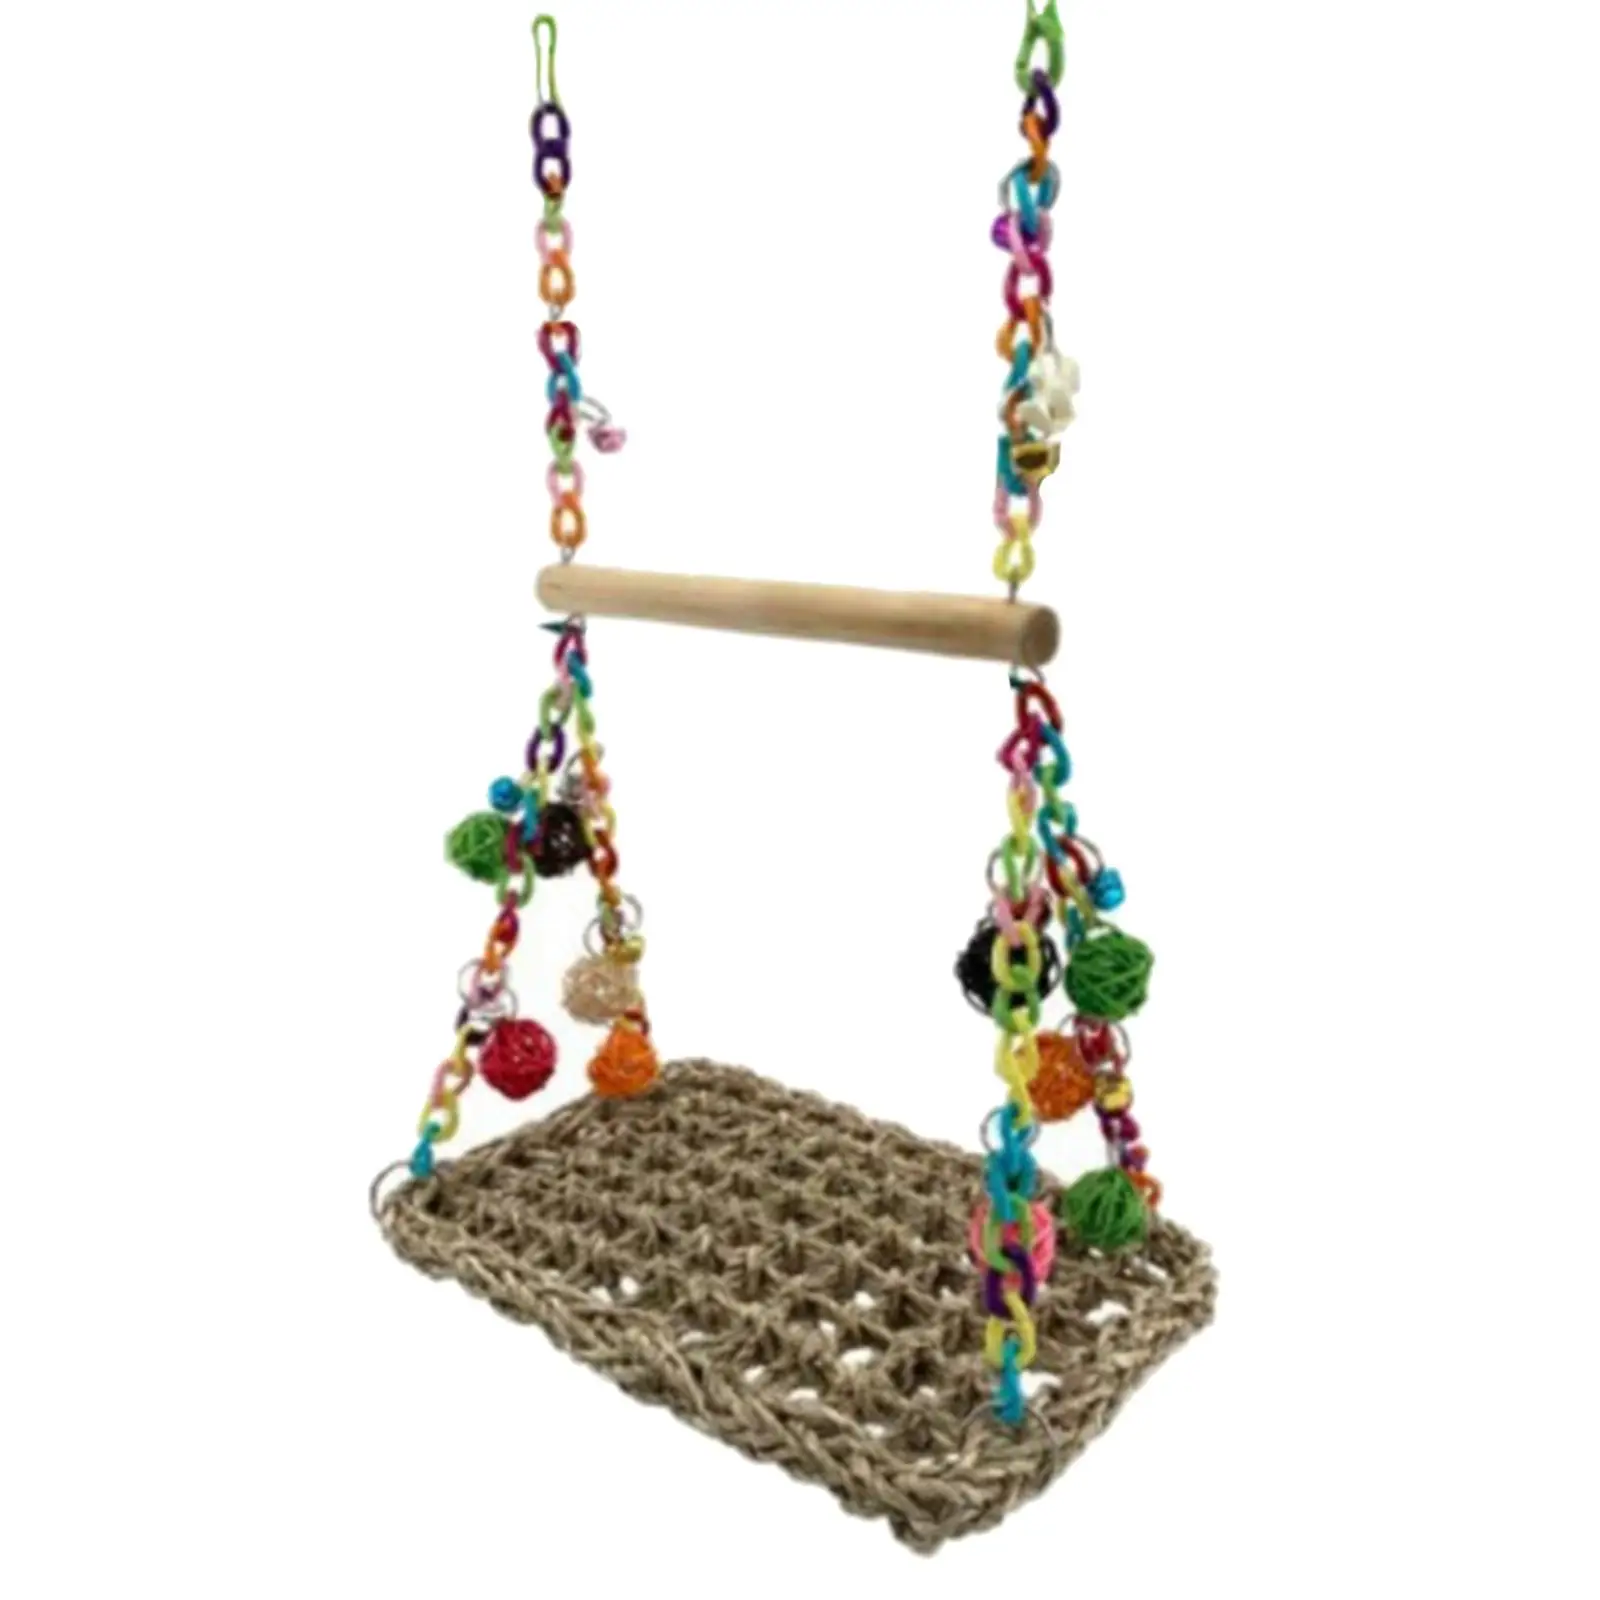 Bird Seagrass Swing Toy Climbing Natural Branches Cockatiel Toy for Pet Bird Finches